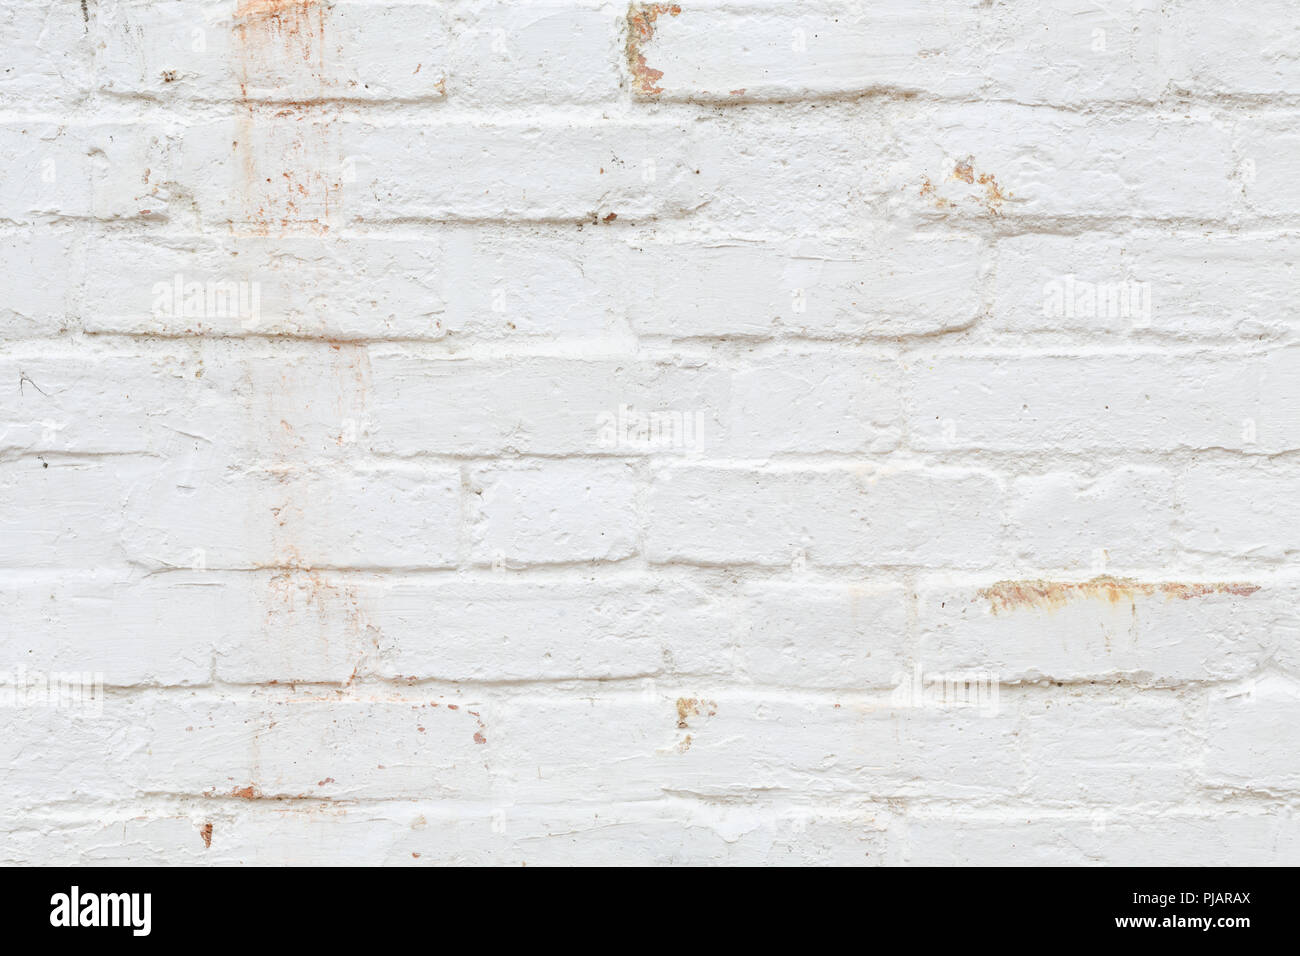 Closeup of old brick wall painted white and distressed, peeling and stained. Ideal for grunge background texture Stock Photo